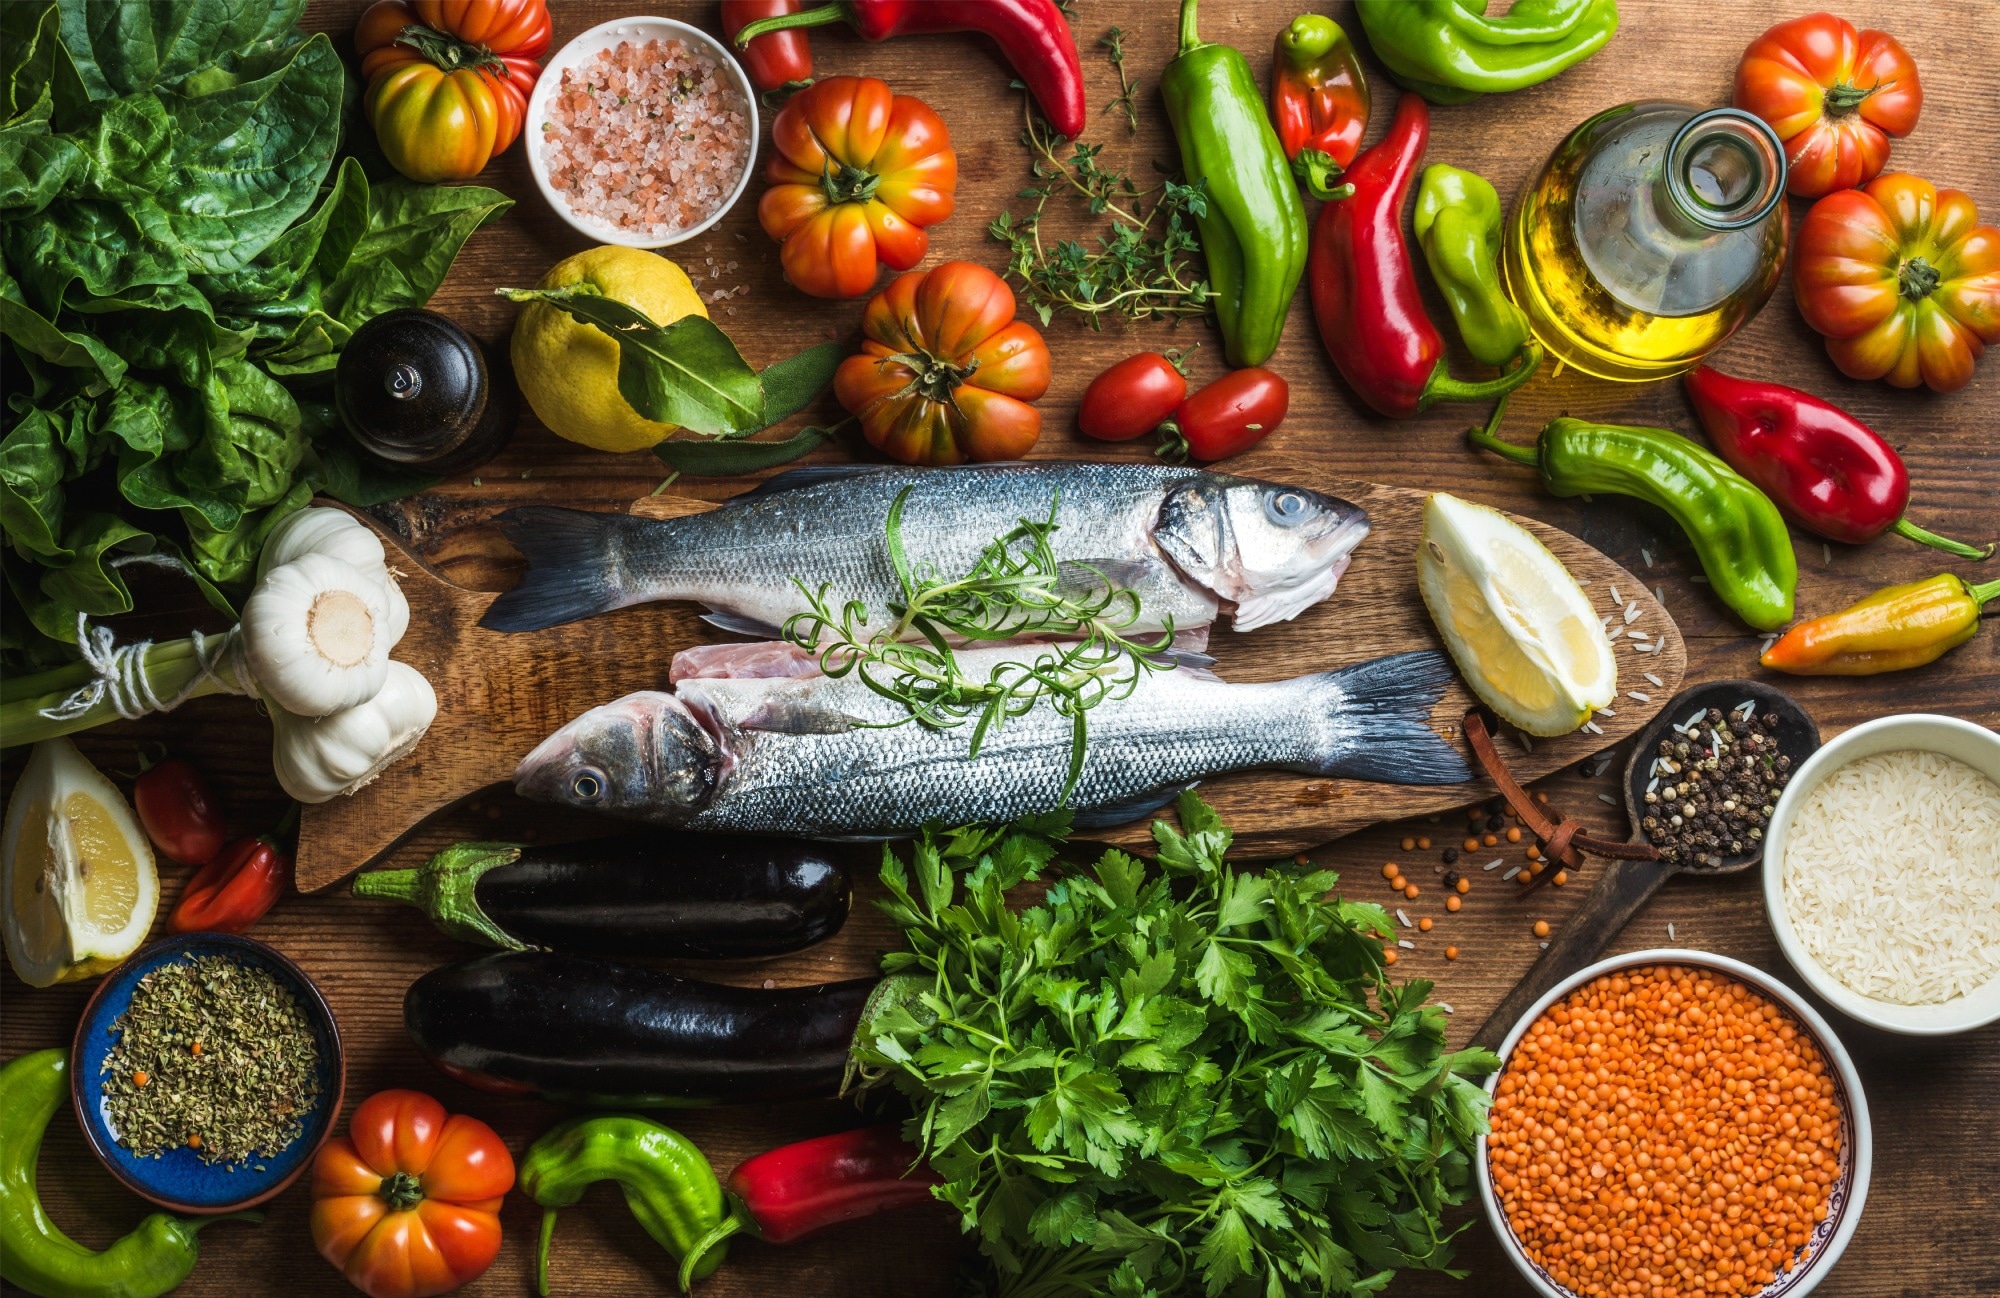 Study: Health–environment efficiency of diets shows nonlinear trends over 1990–2011. Image Credit: Foxys Forest Manufacture/Shutterstock.com